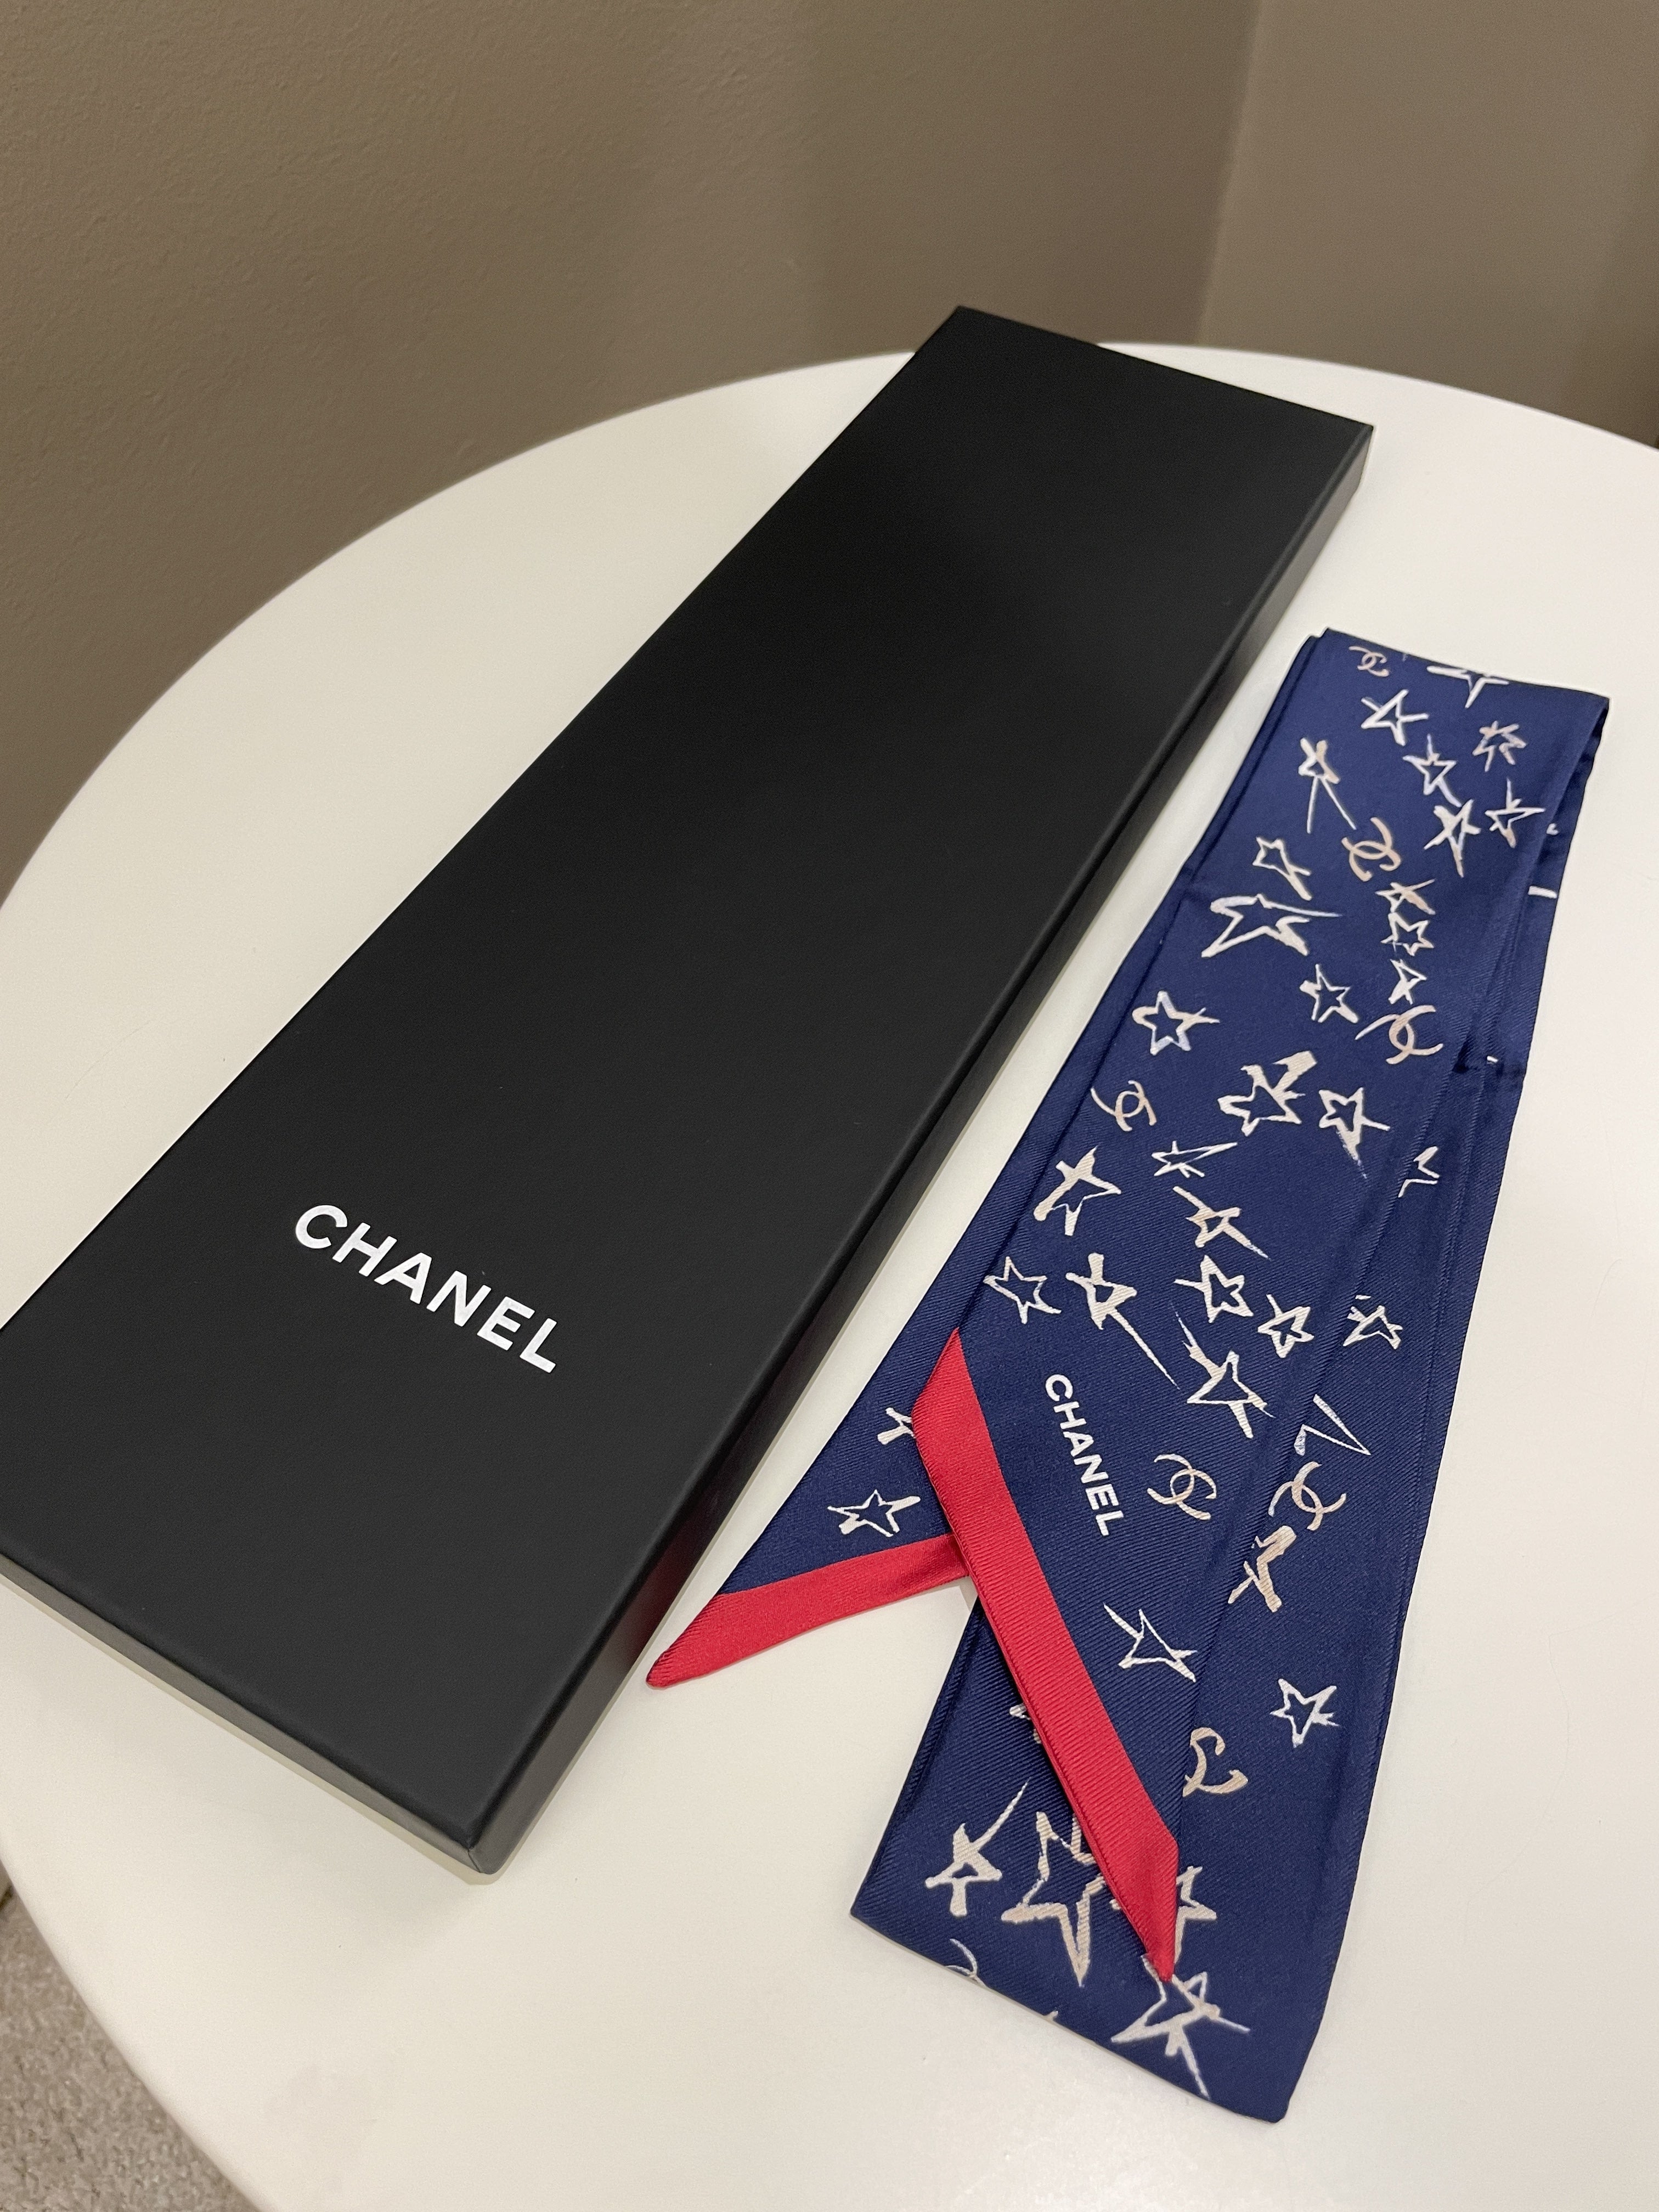 Chanel Slim Bandeau
Navy/ White/ Red